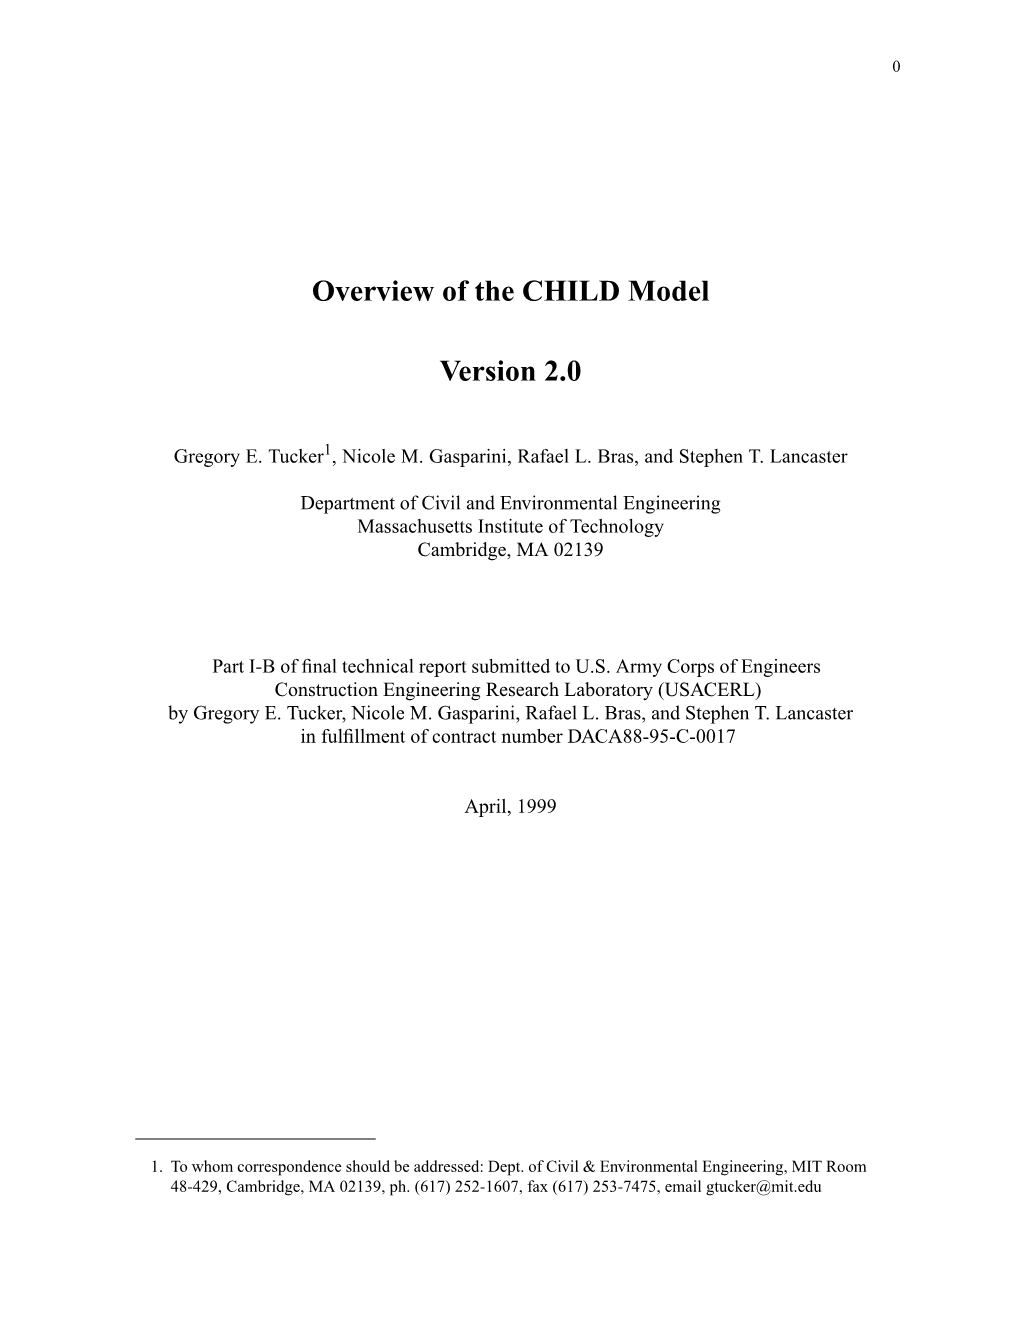 Overview of the CHILD Model Version